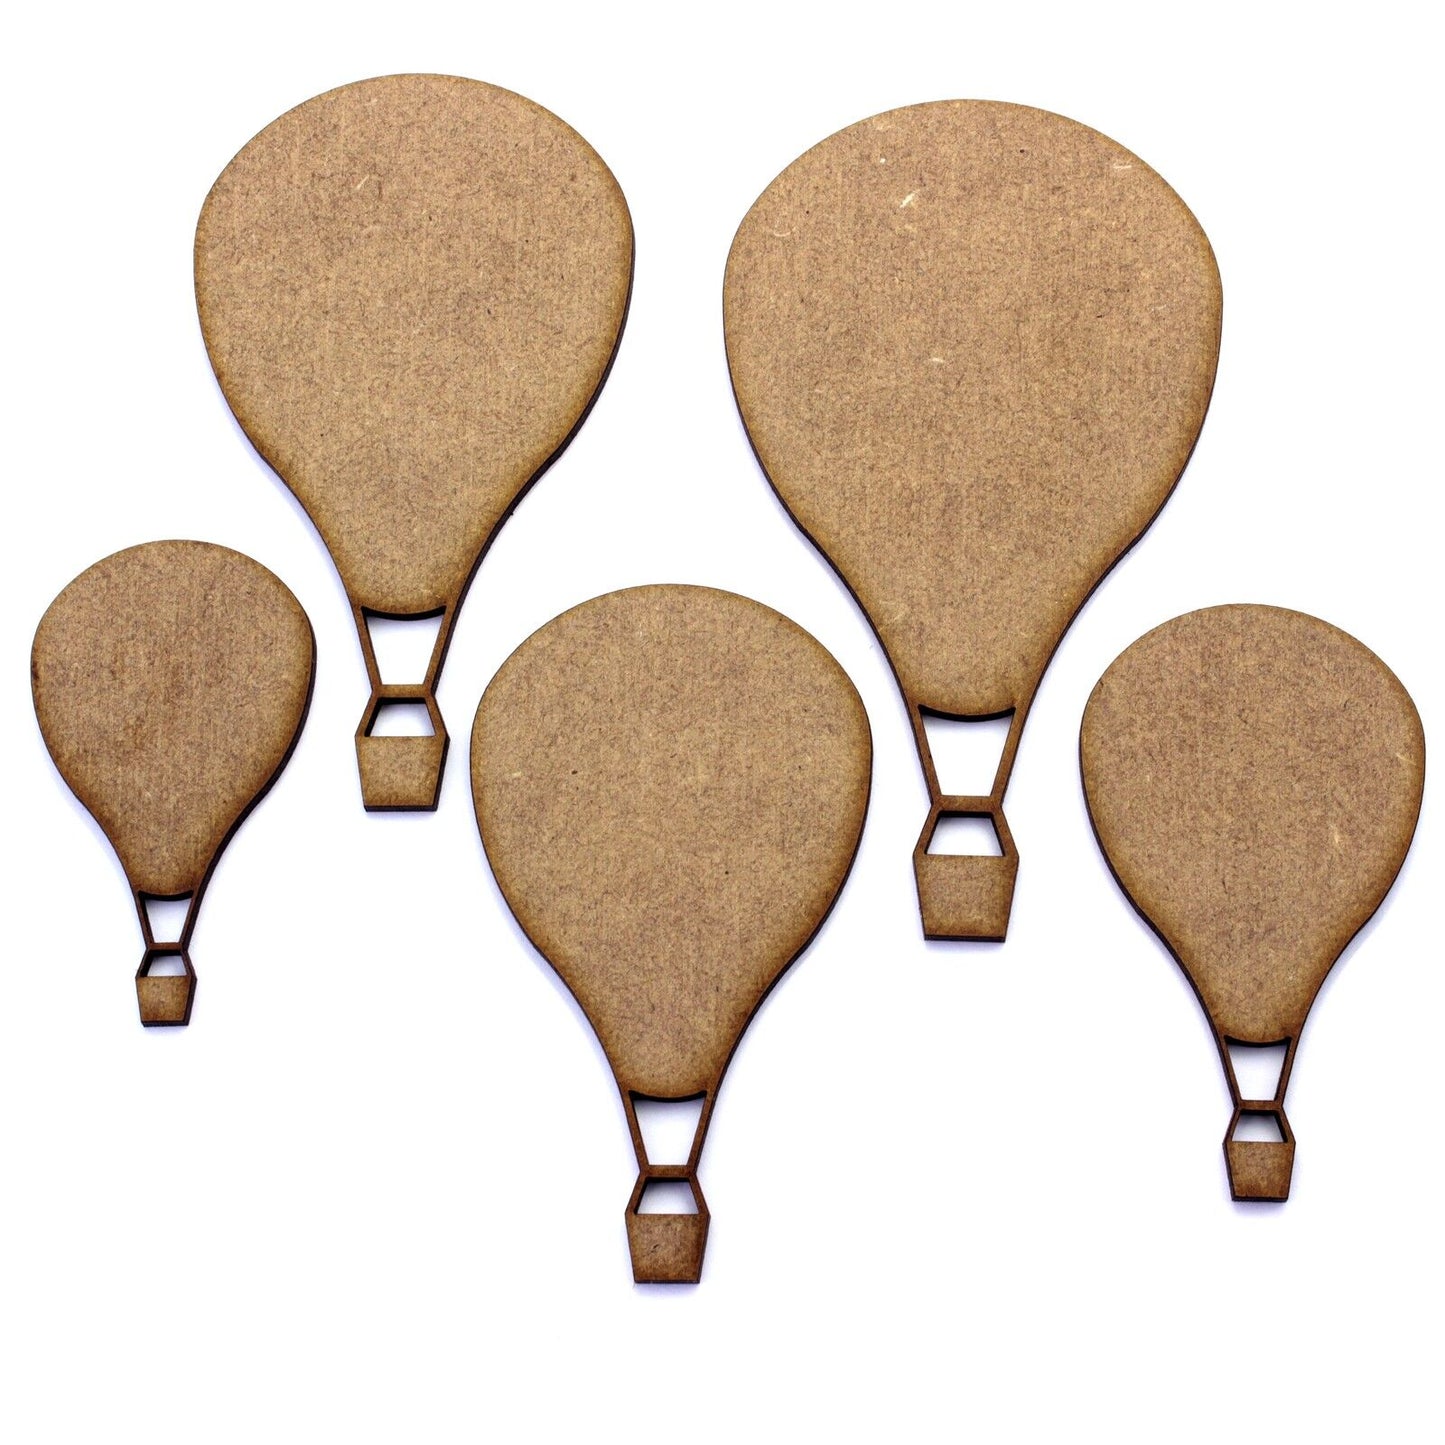 Air Balloon Craft Shapes. Various Sizes 20mm - 200mm. 2mm MDF Wood Laser Cut